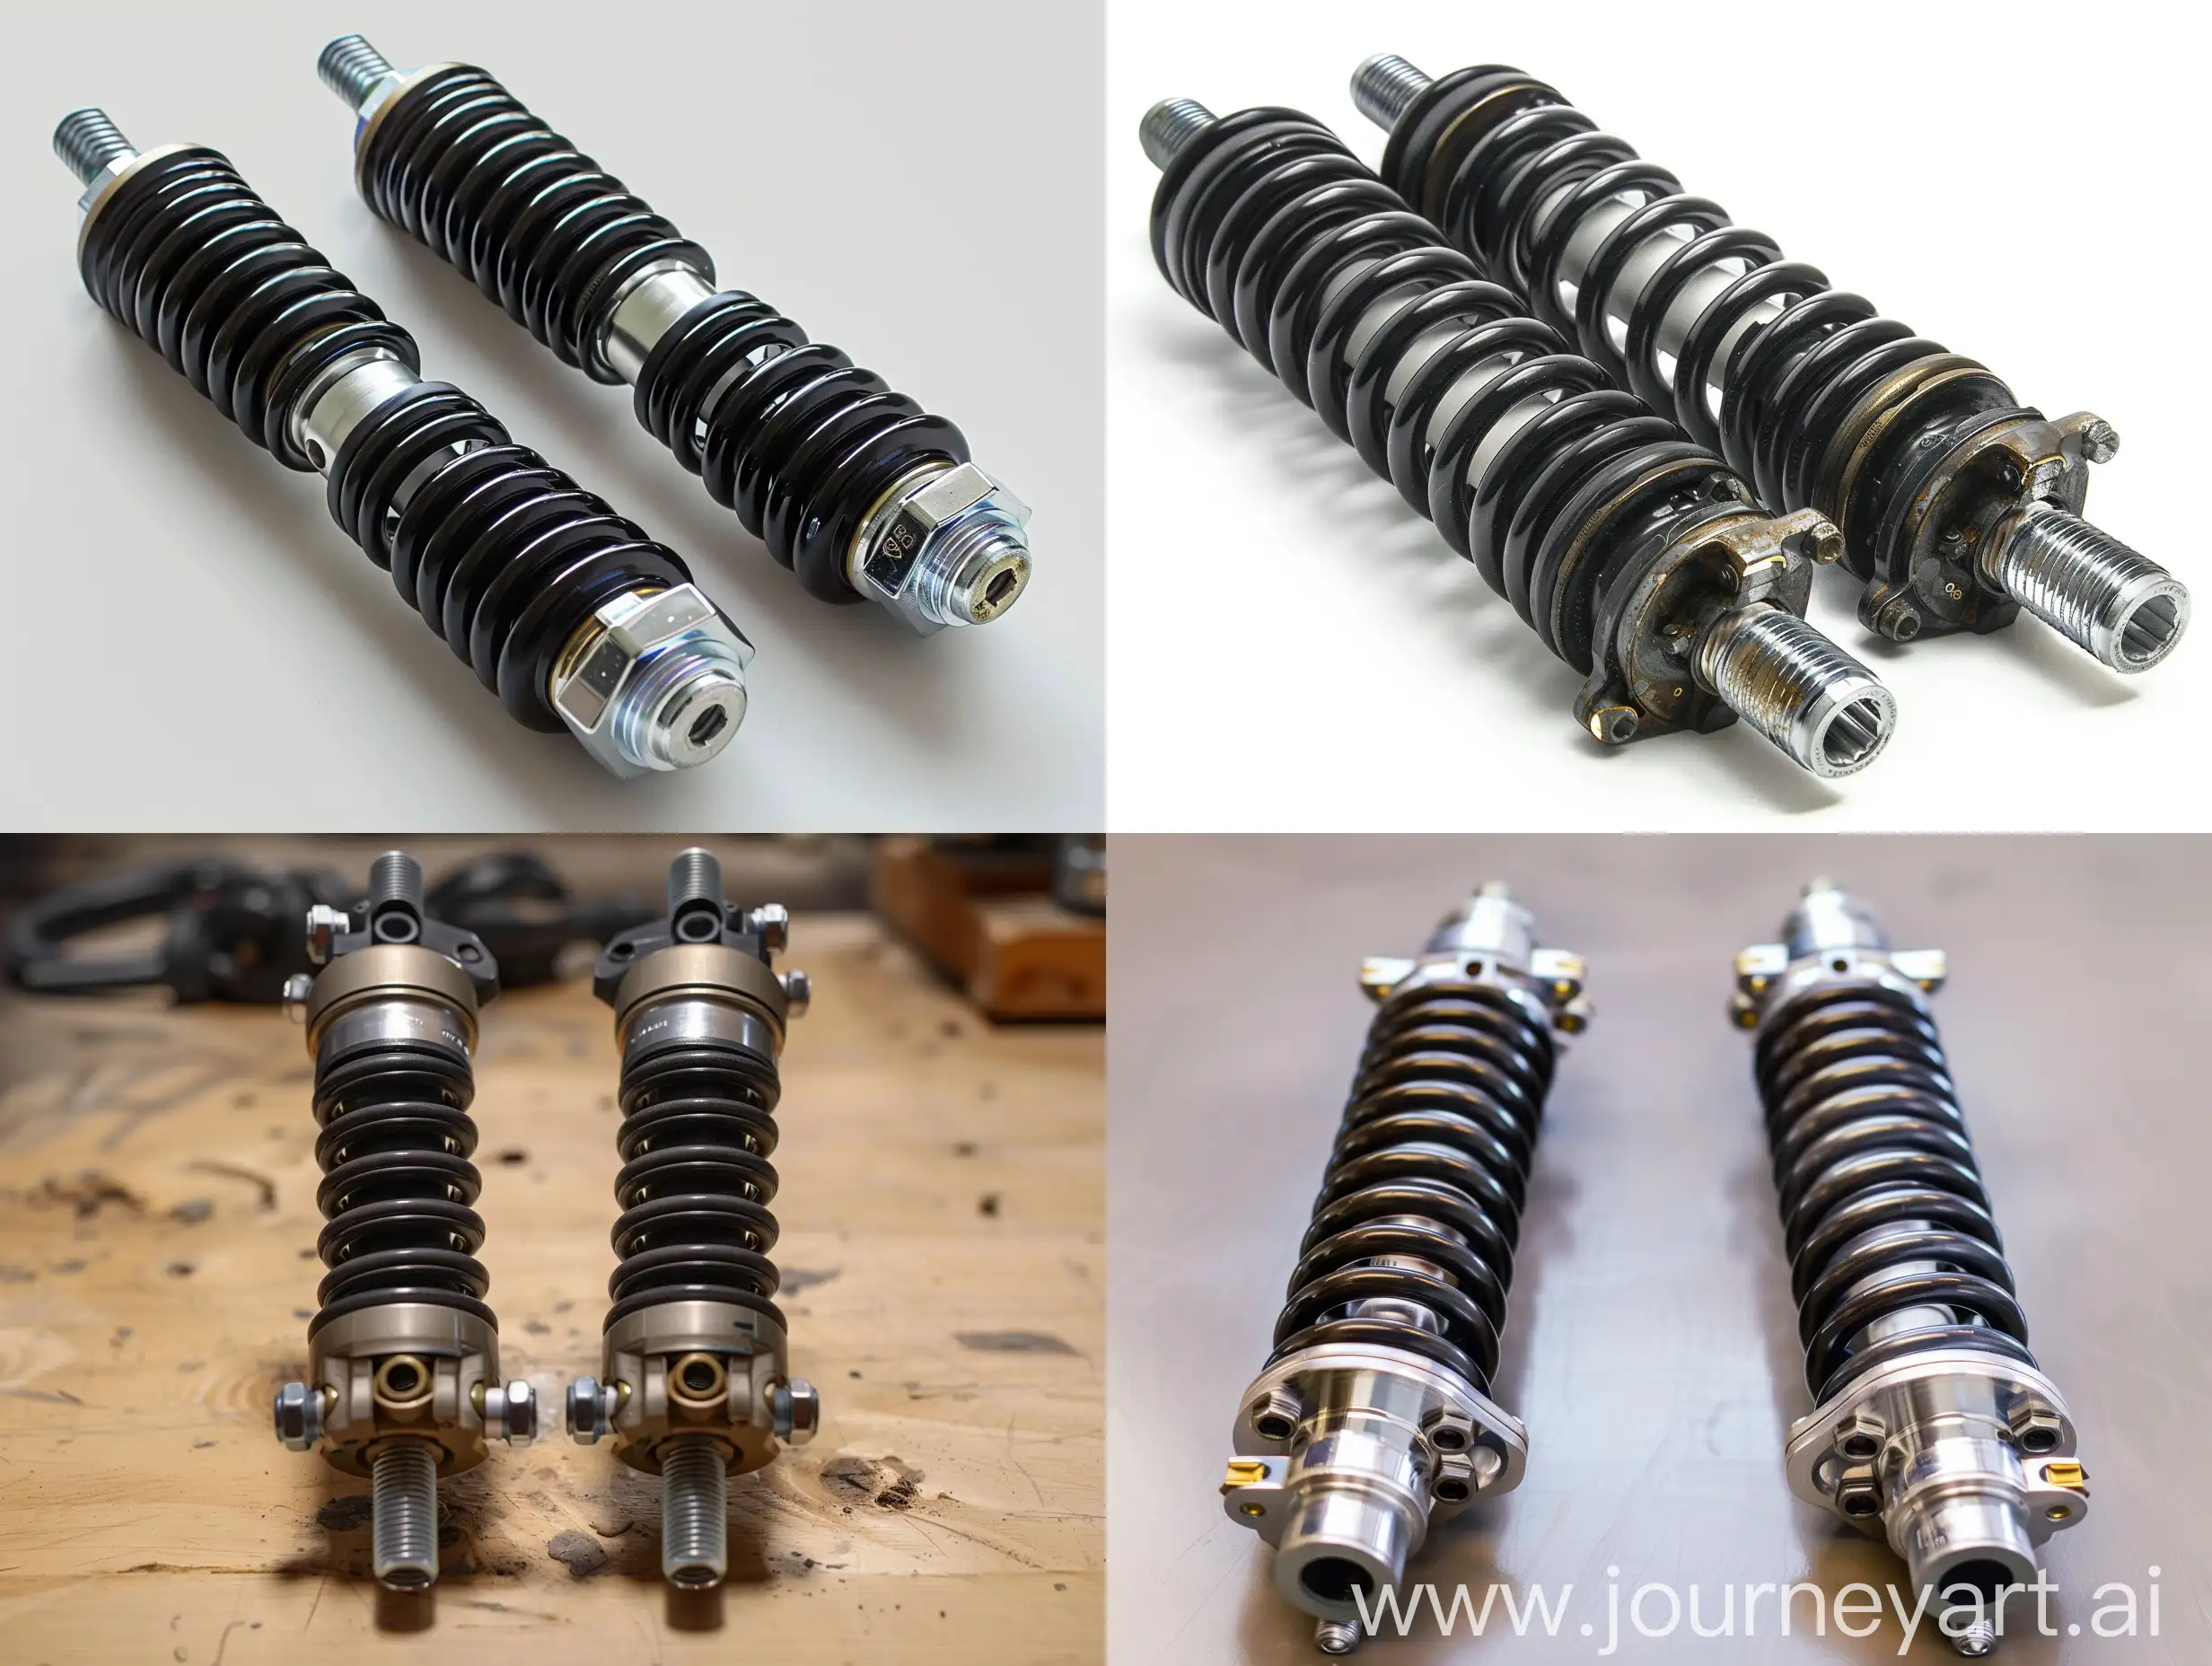 A pair of car shock absorbers